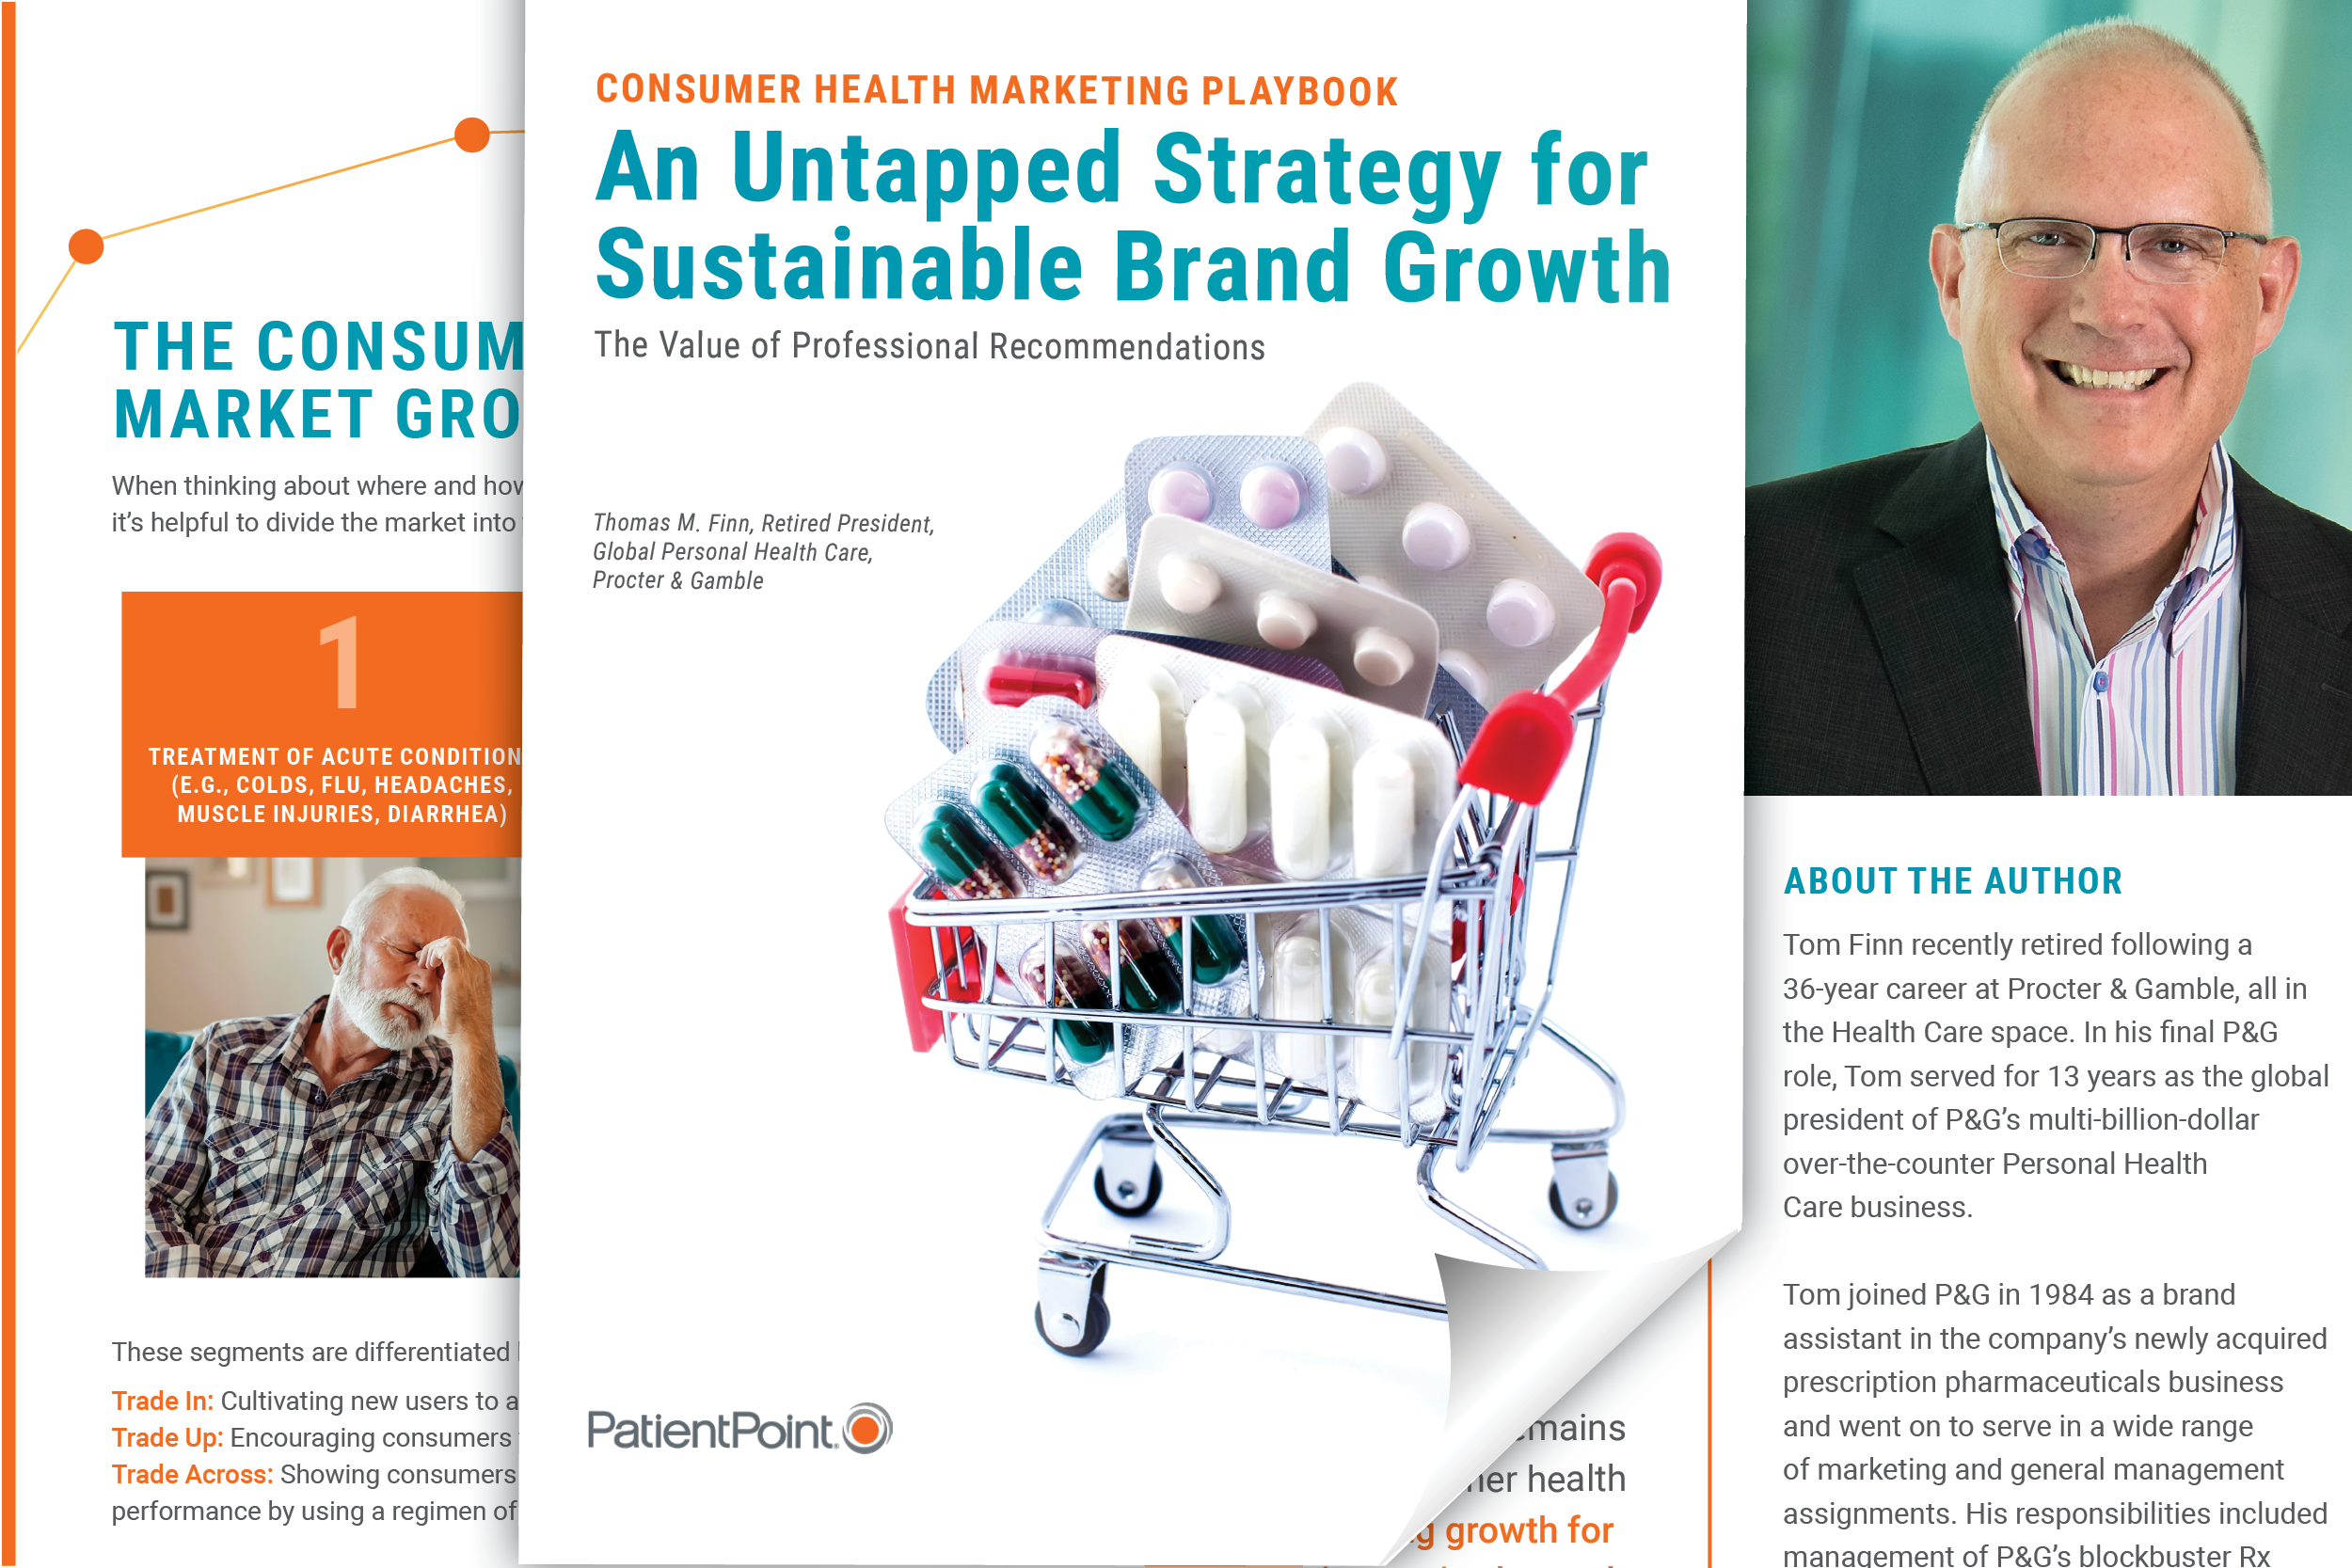 An Untapped Strategy for Sustainable Brand Growth